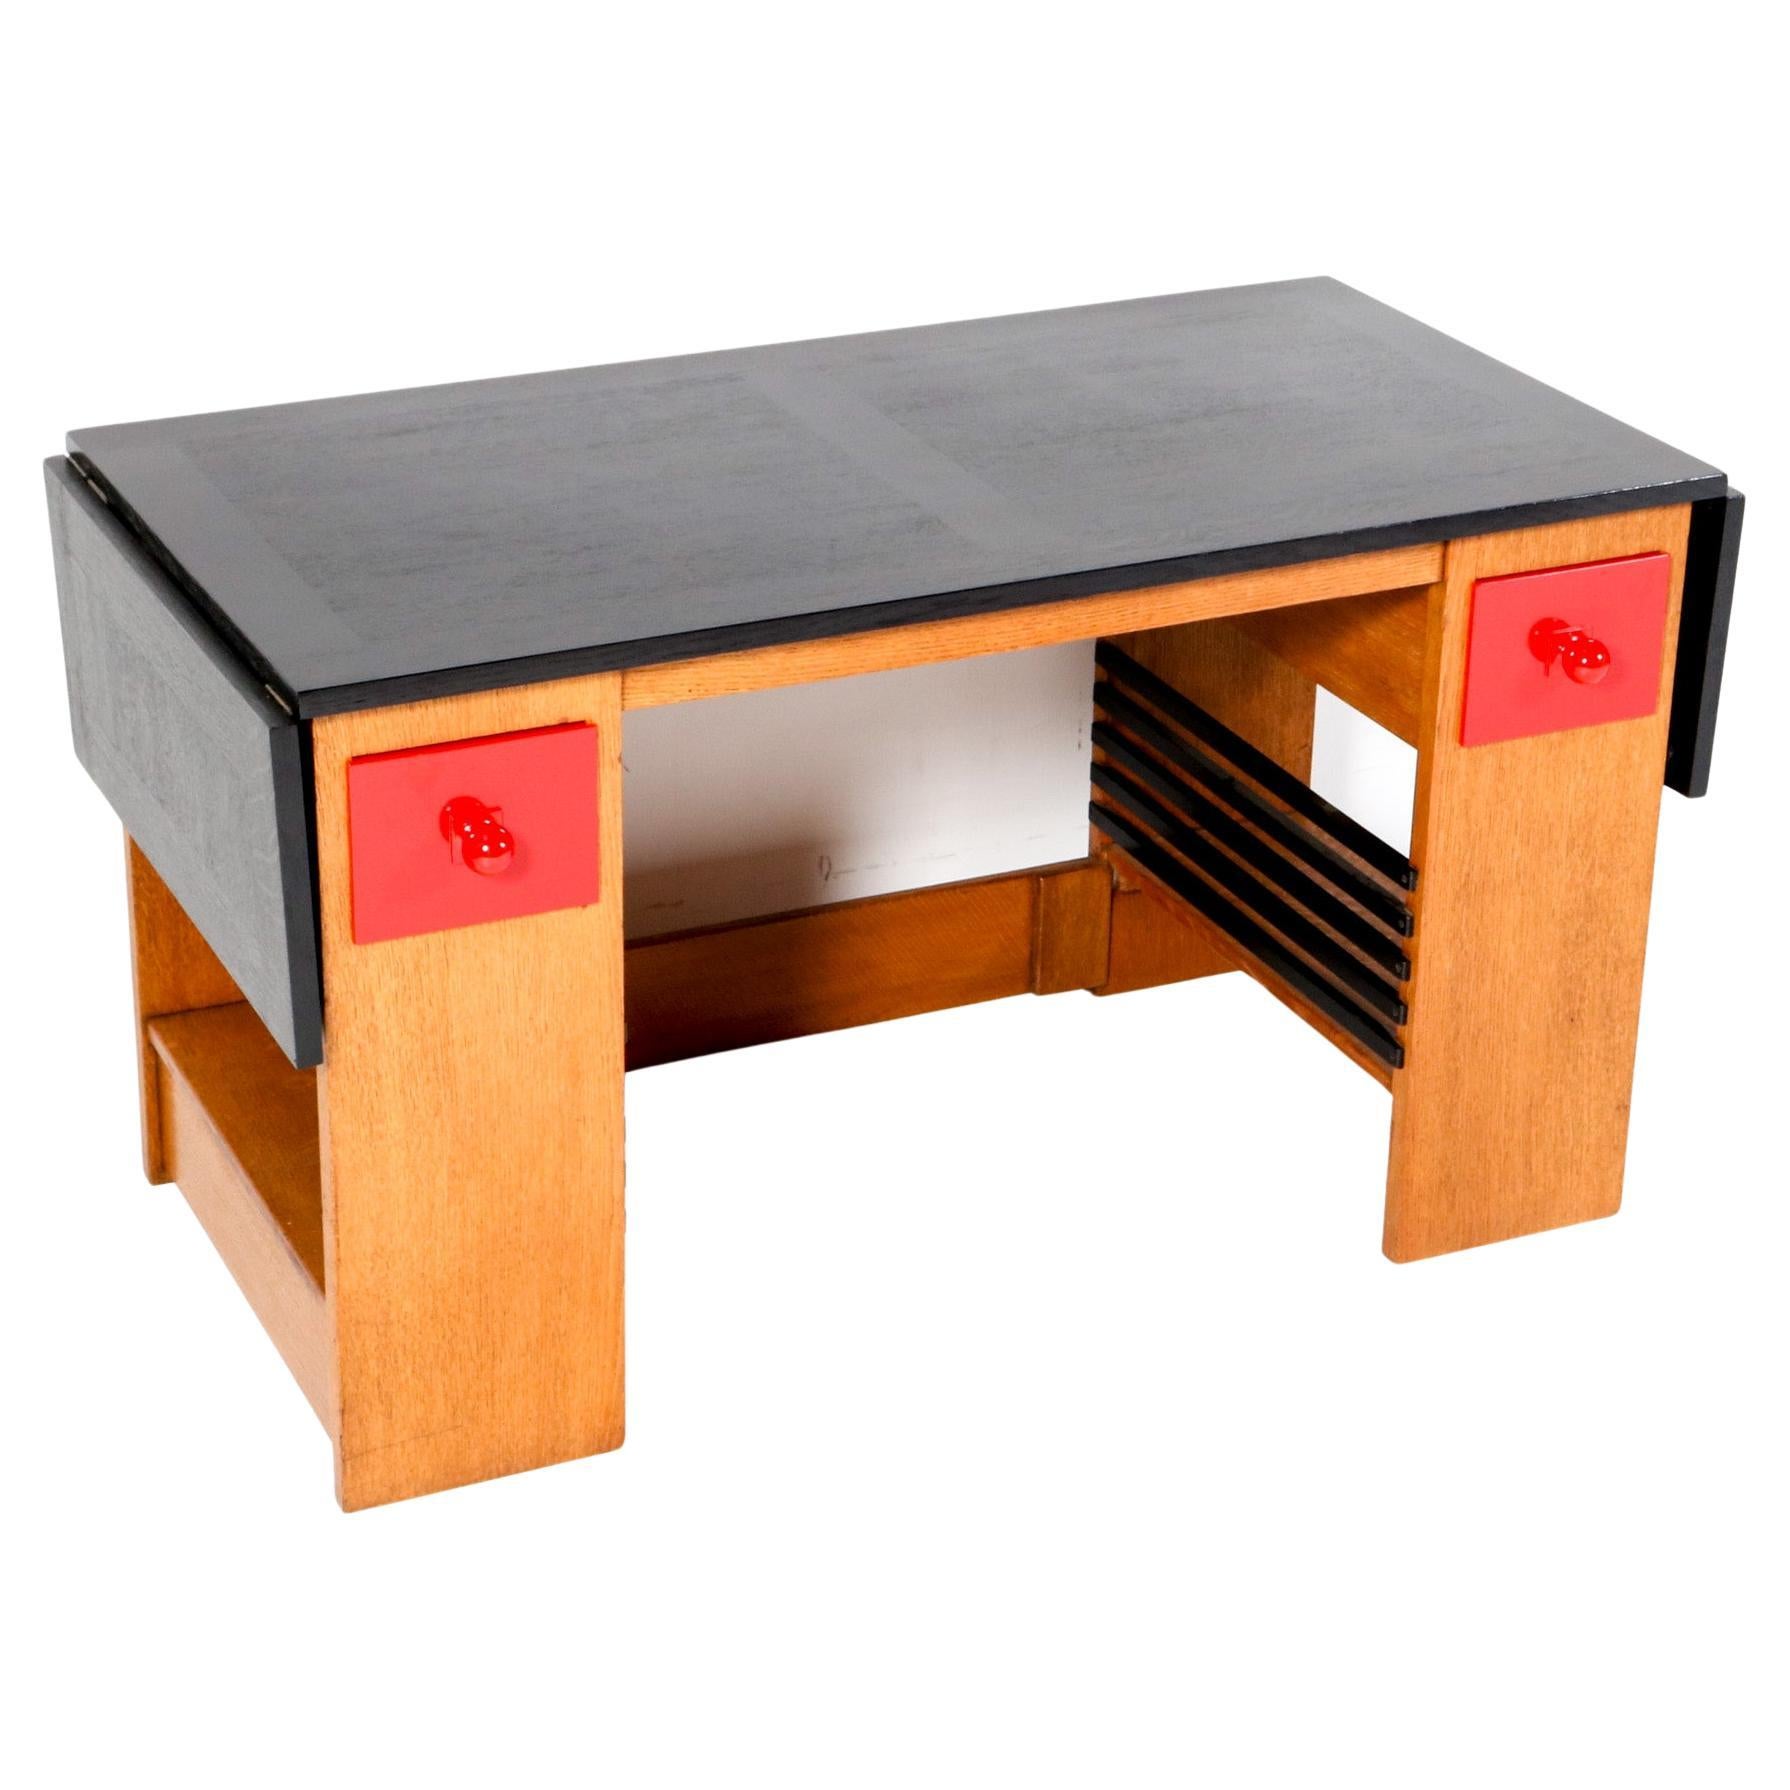 Oak Art Deco Modernist Desk or Writing Table by Hendrik Wouda for Pander, 1920s For Sale